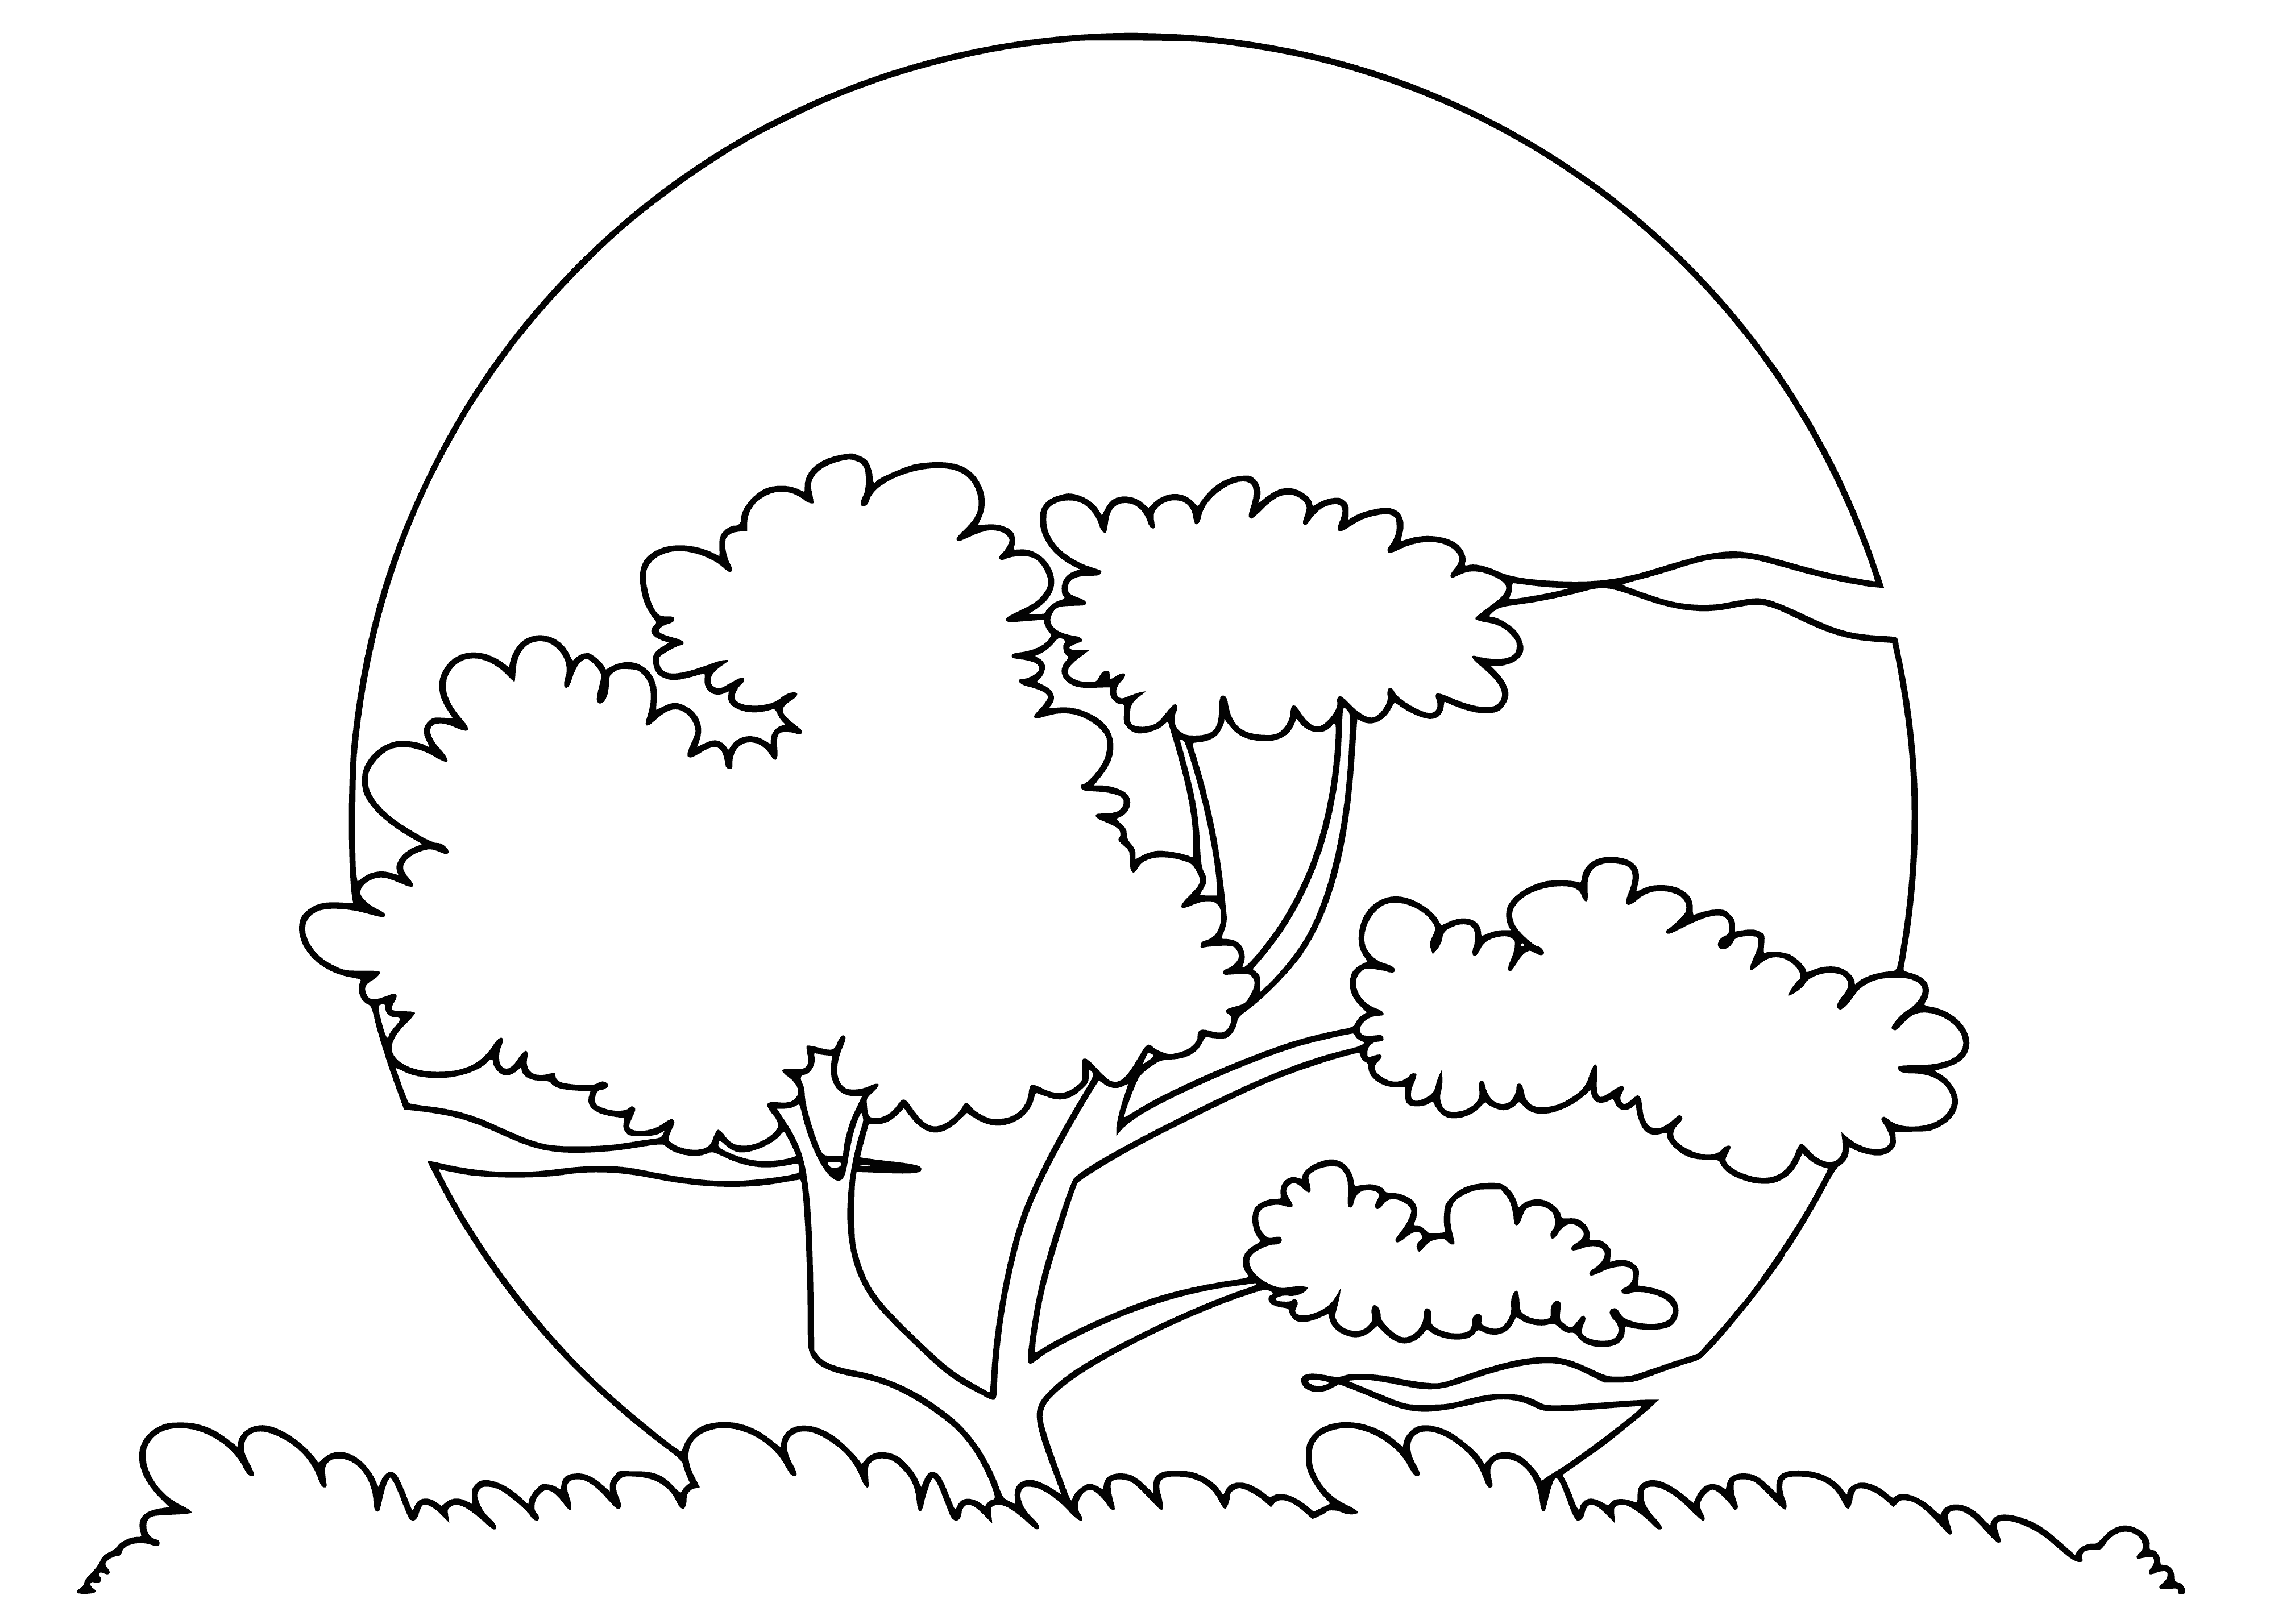 coloring page: A tree reaches to the sky against an orange-yellow sky backdrop as the Sun sets behind a range of mountains.